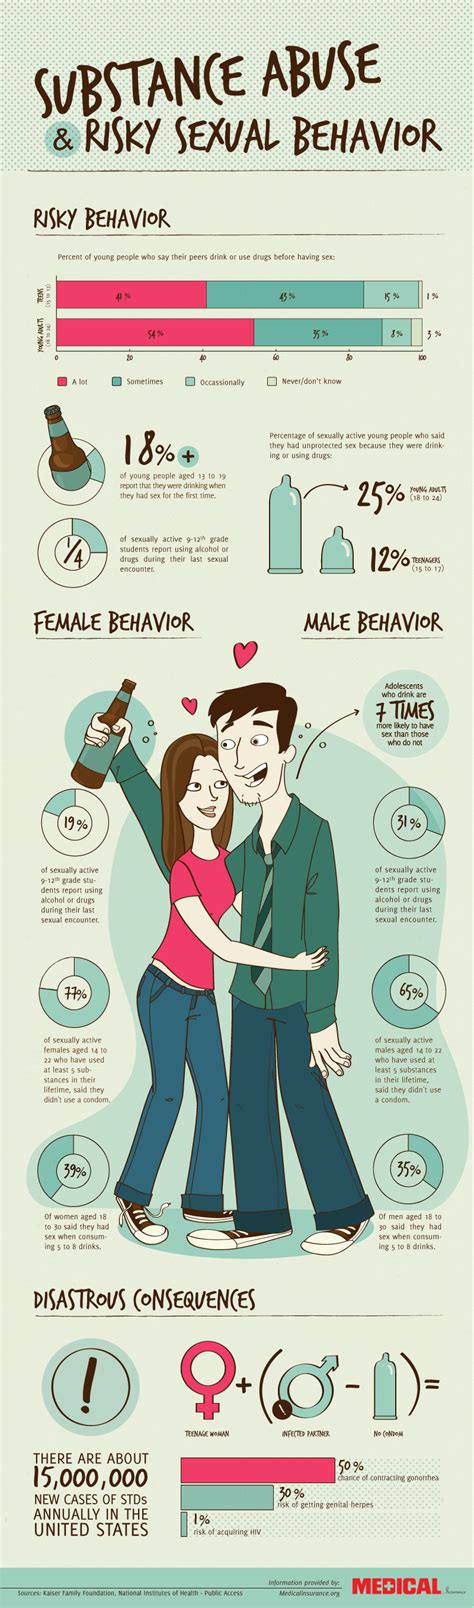 Substance Abuse And Risky Sexual Behavior [infographic] Infographic List